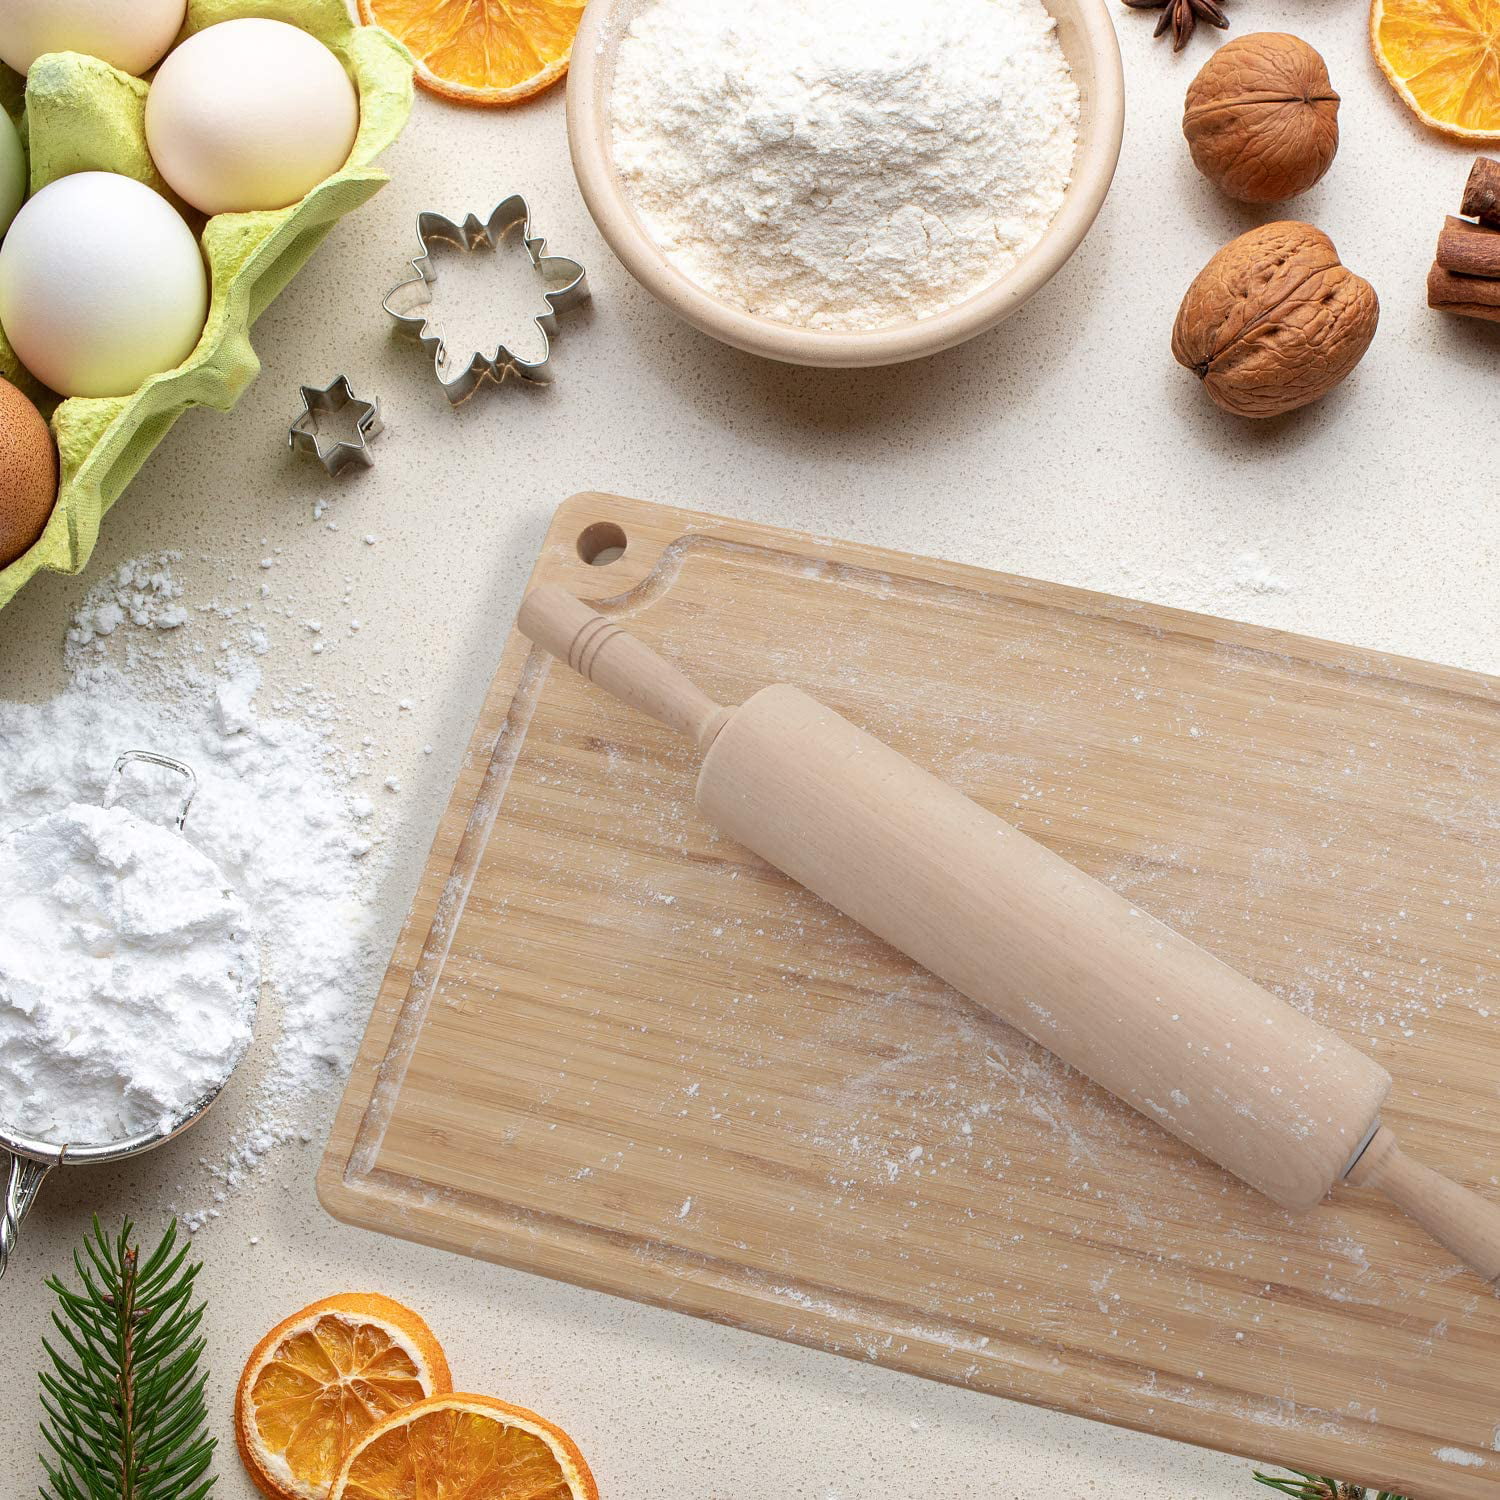 French Rolling Pin for Baking 18 Inch Gifbera Better Wood Beech Dough Roller Baking Utensils for Pizza Bread Pastry Fondant 